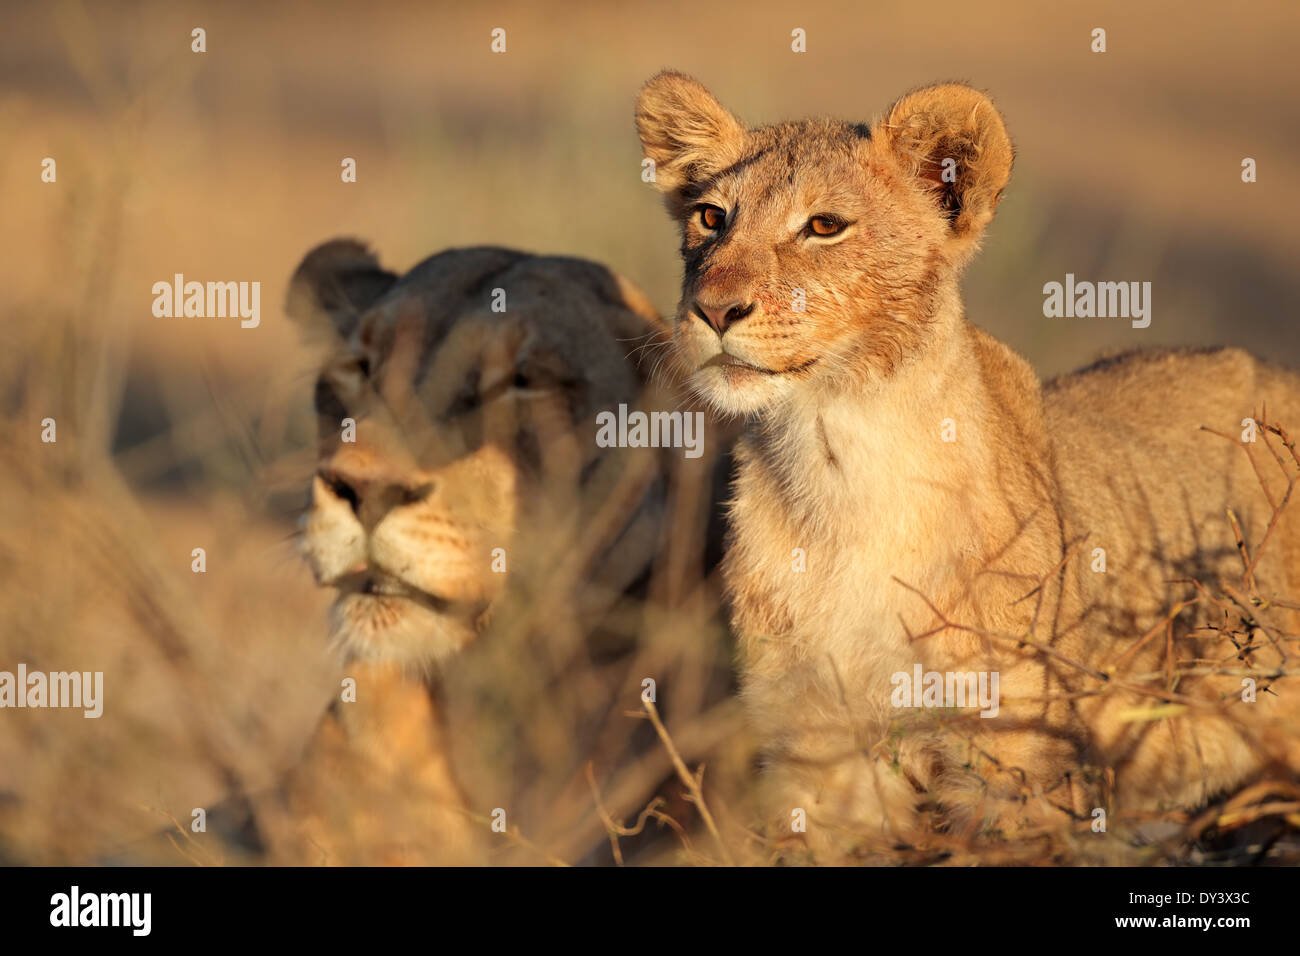 African lioness and cub (Panthera leo) relaxing in early morning light, Kalahari desert, South Africa Stock Photo